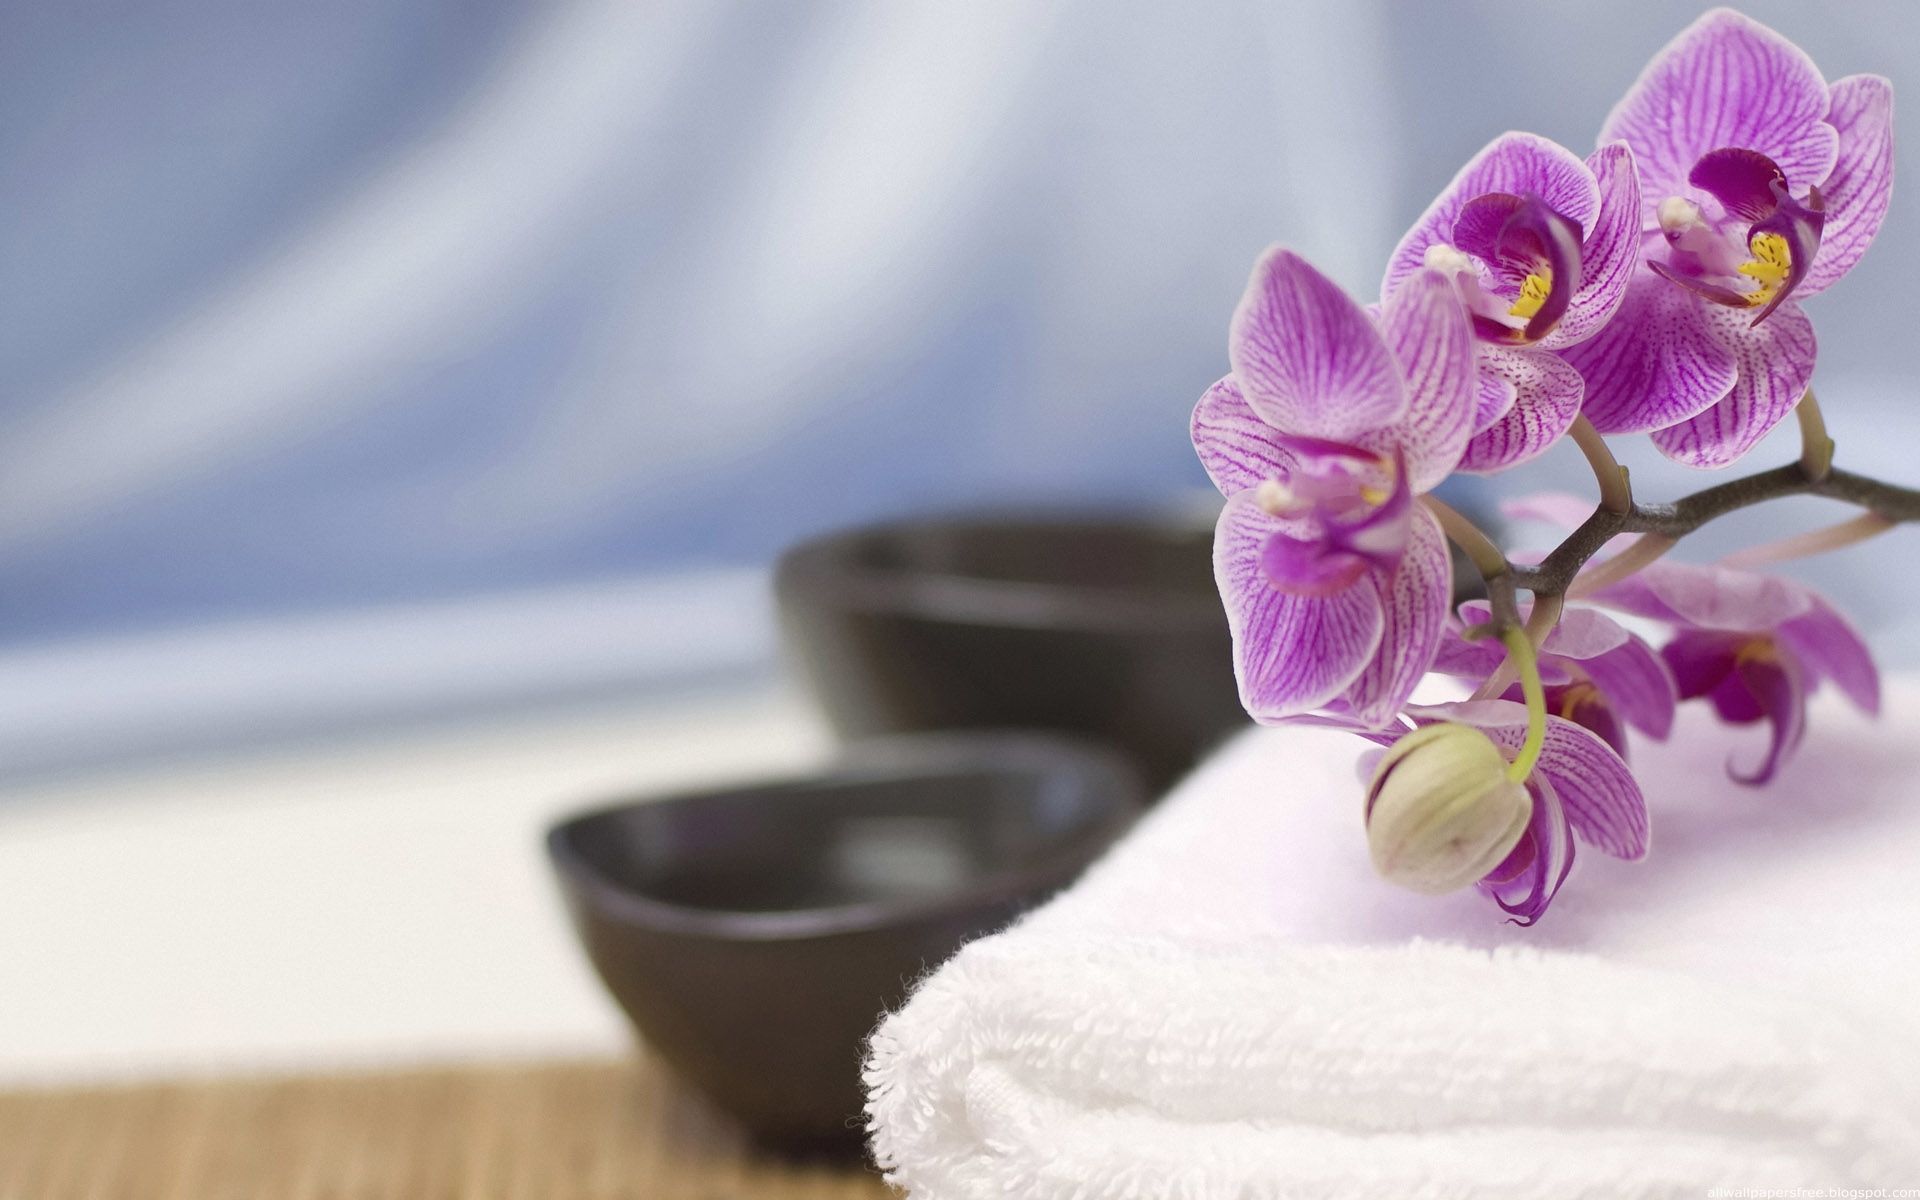 Free download Relaxing Spa Wallpaper 1920 X 1200 Photo 8 of 40 phombocom [1920x1200] for your Desktop, Mobile & Tablet. Explore Free Relaxing Wallpaper. Free Calming Wallpaper, Relax Wallpaper, Most Beautiful Relaxing Wallpaper